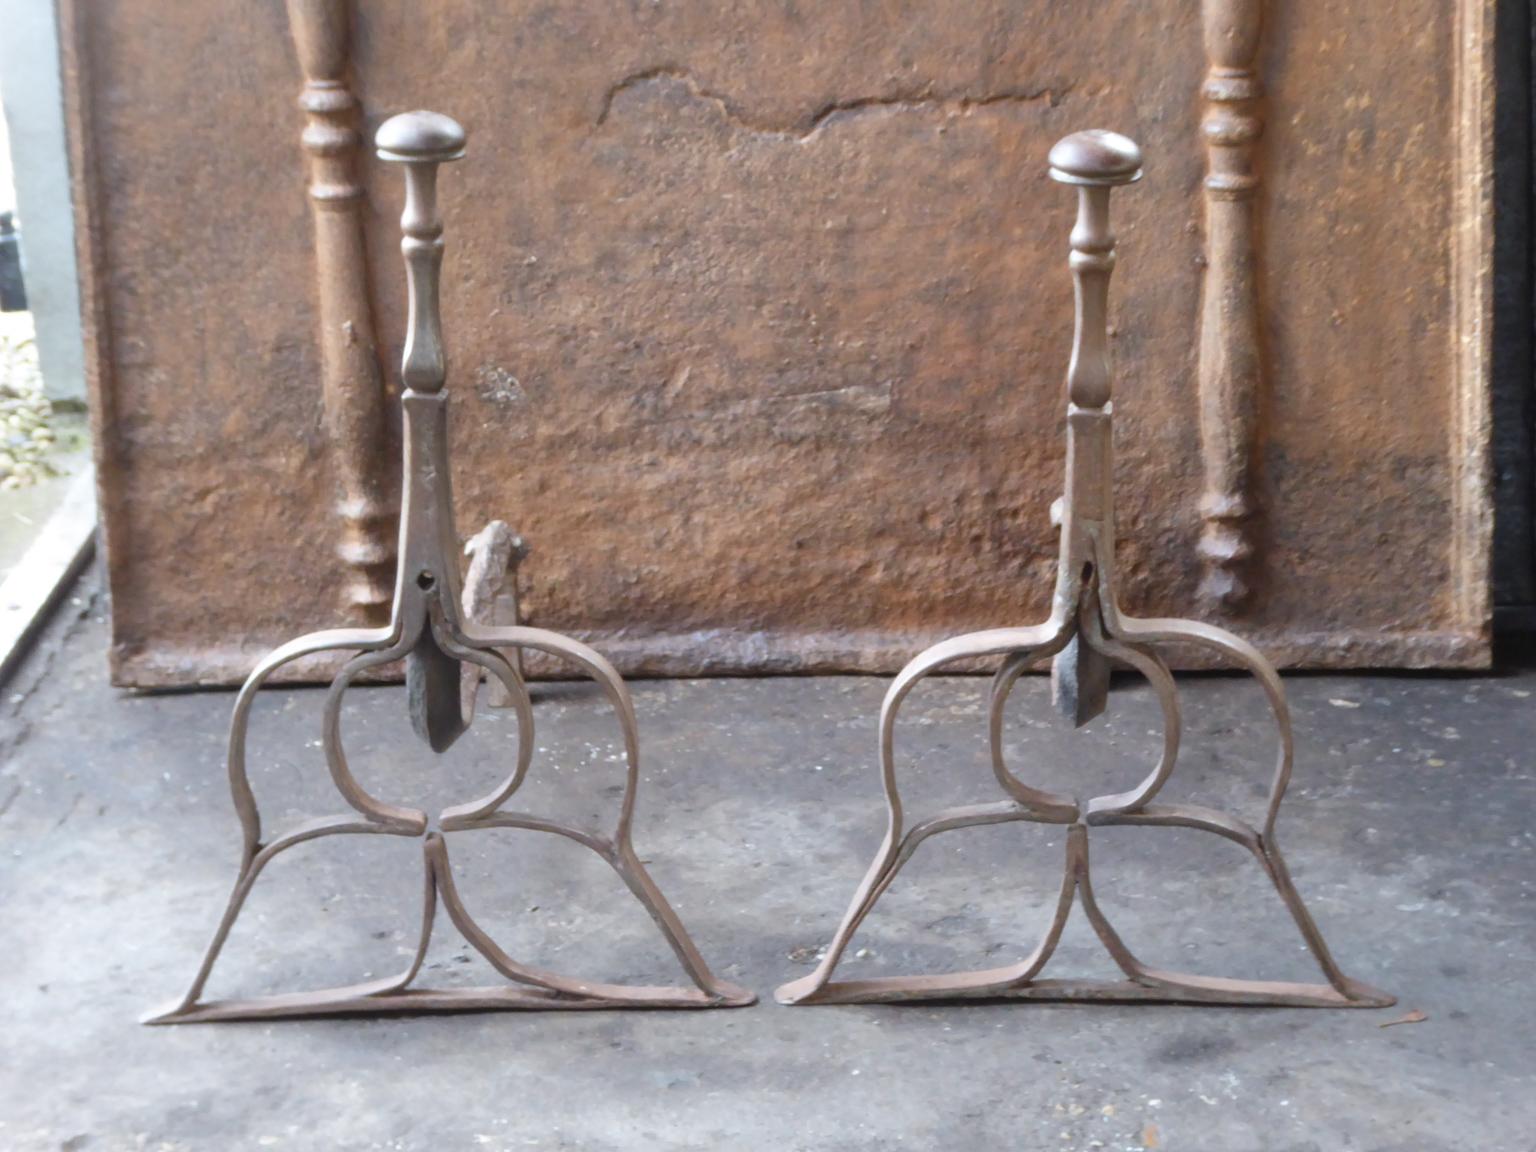 Beautifully forged 17th century Dutch andirons made of wrought iron. The style of the andirons is Louis III. They are in a good condition.